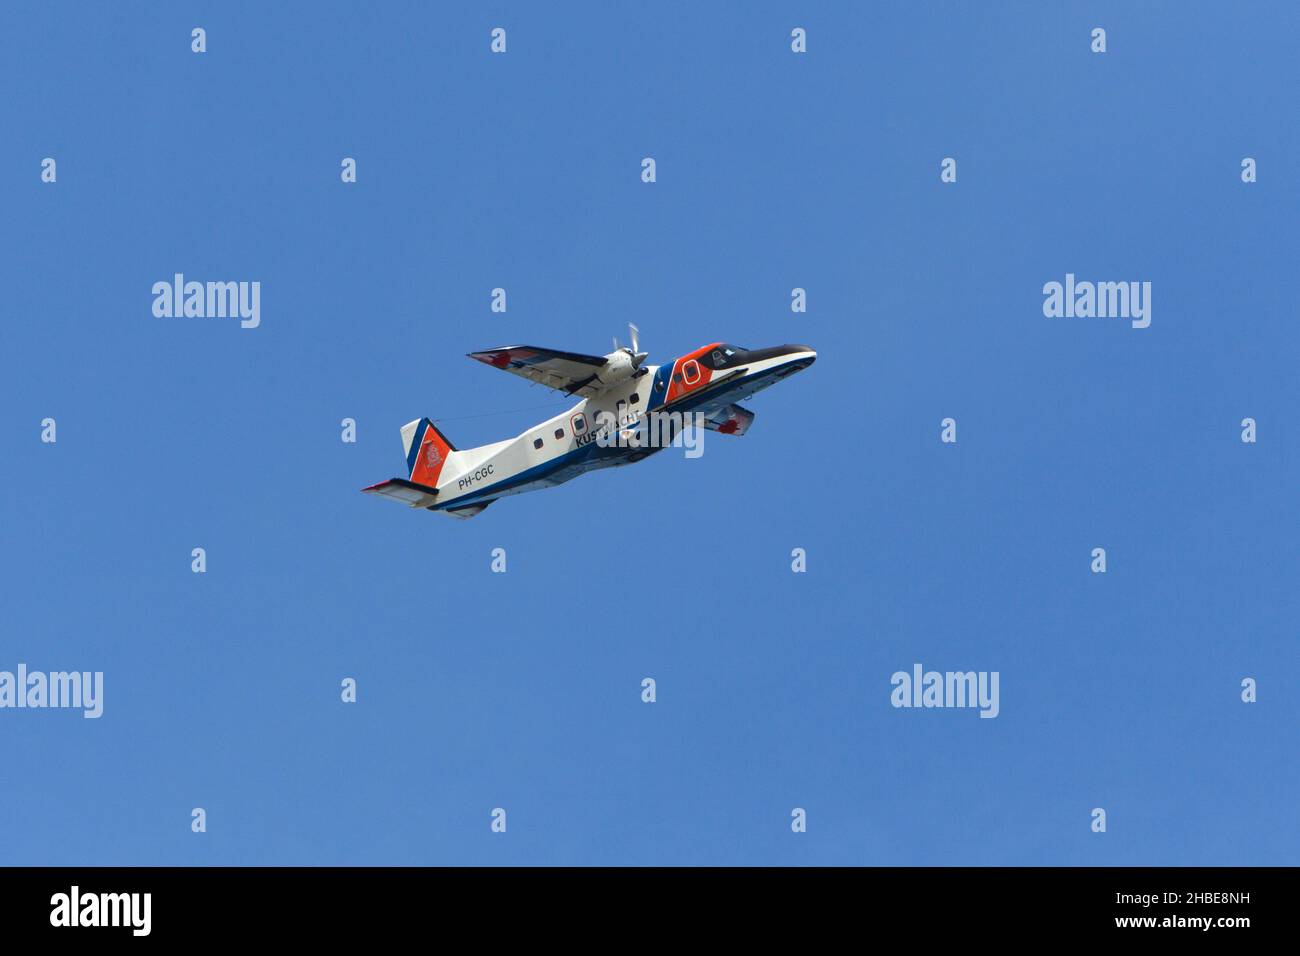 Airplane, twin engined Dornier Do-228-212 patrol plane in flight from the Dutch coastguard, island of Texel, Holland, Europe Stock Photo